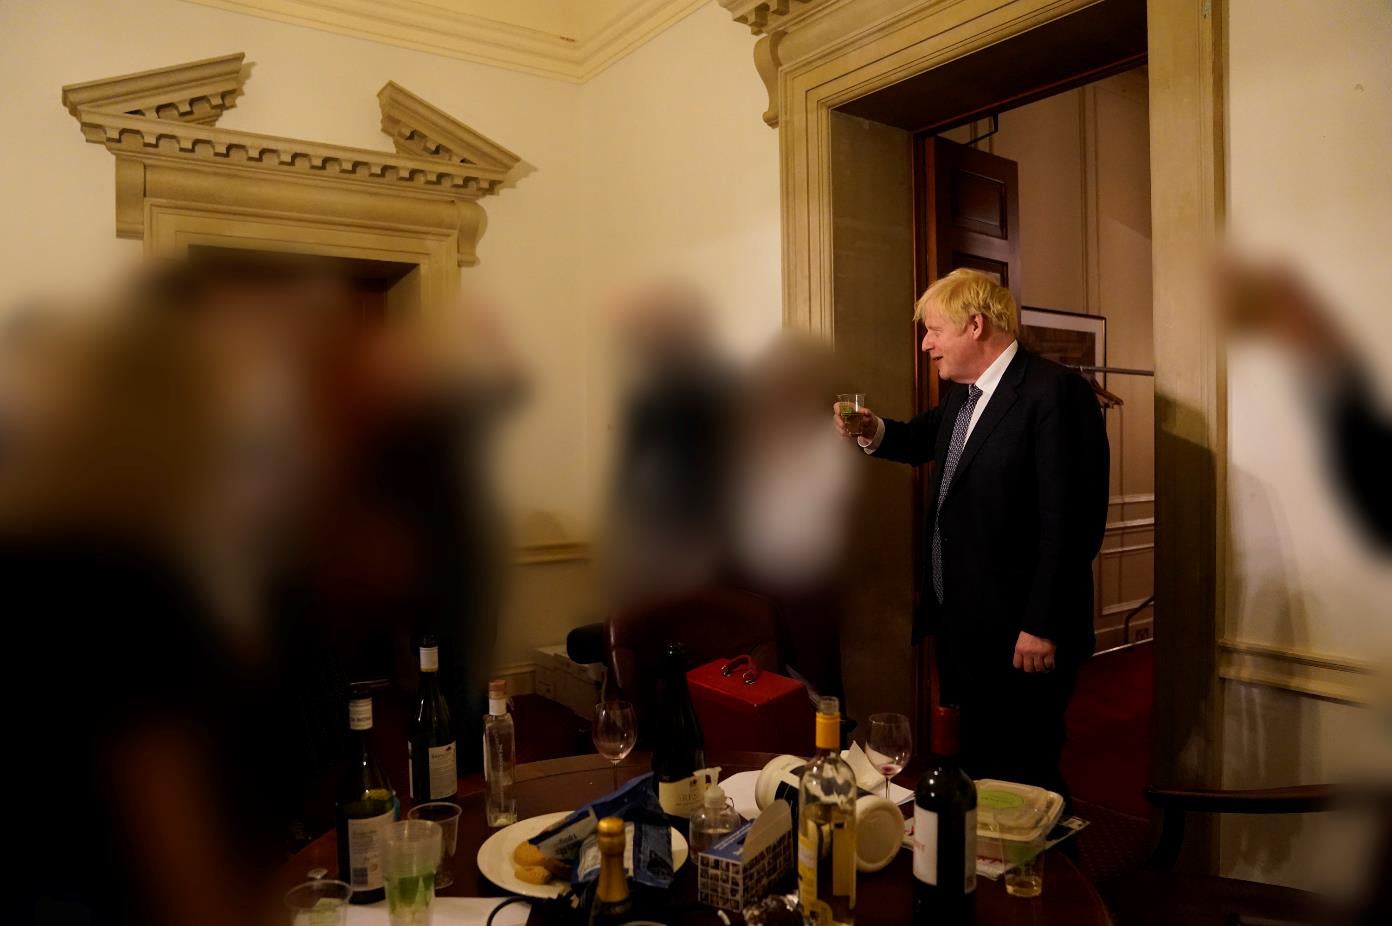 Photographs of Boris Johnson drinking at a staff leaving do were published as part of Sue Gray’s report into lockdown parties (Sue Gray Report/Cabinet Office/PA)